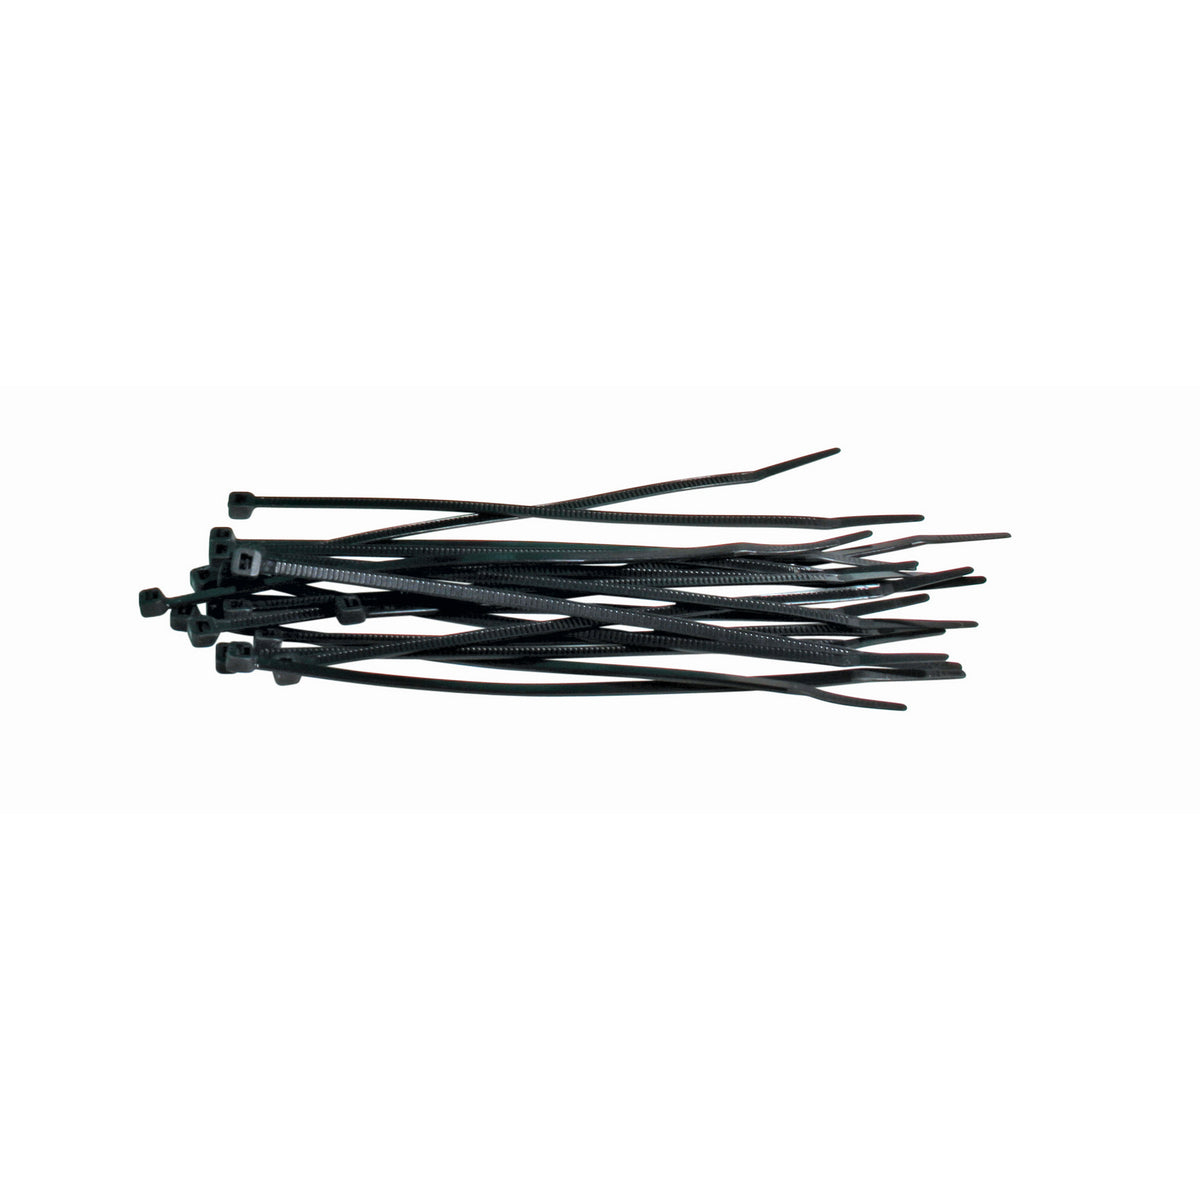 Cable Ties Black - 380 mm x 7.6 mm